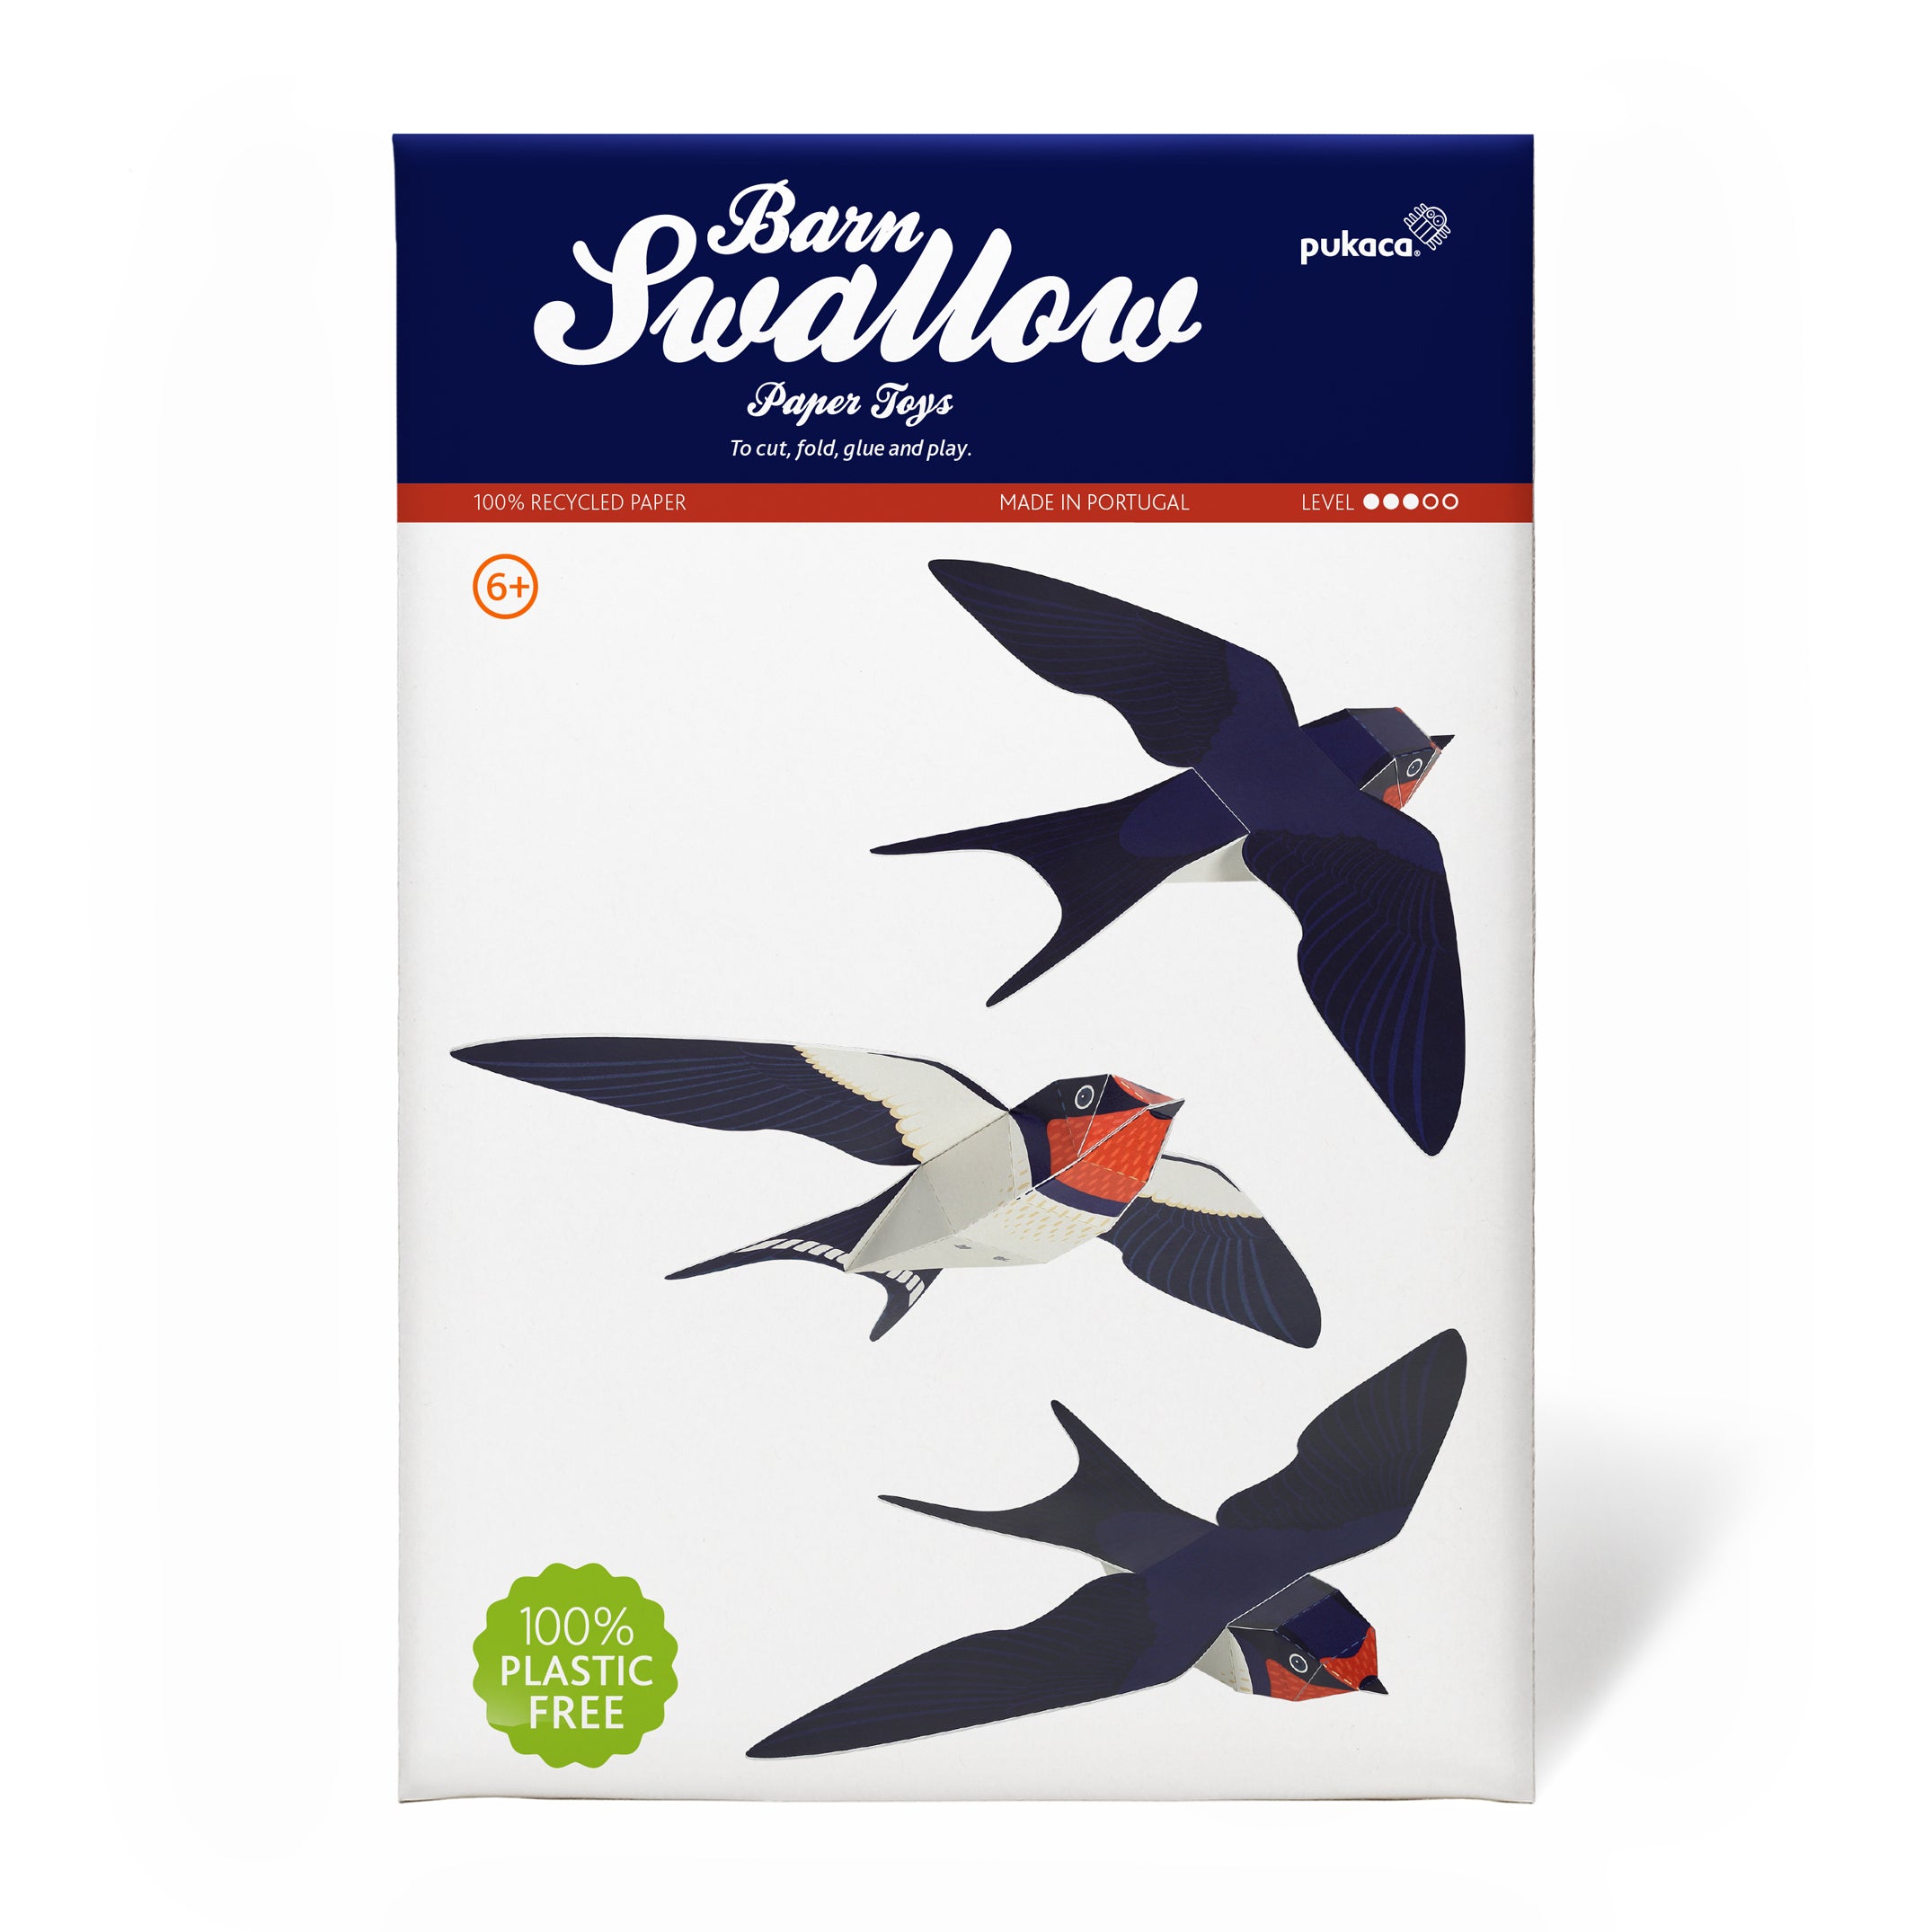 Swallows - Paper Toy